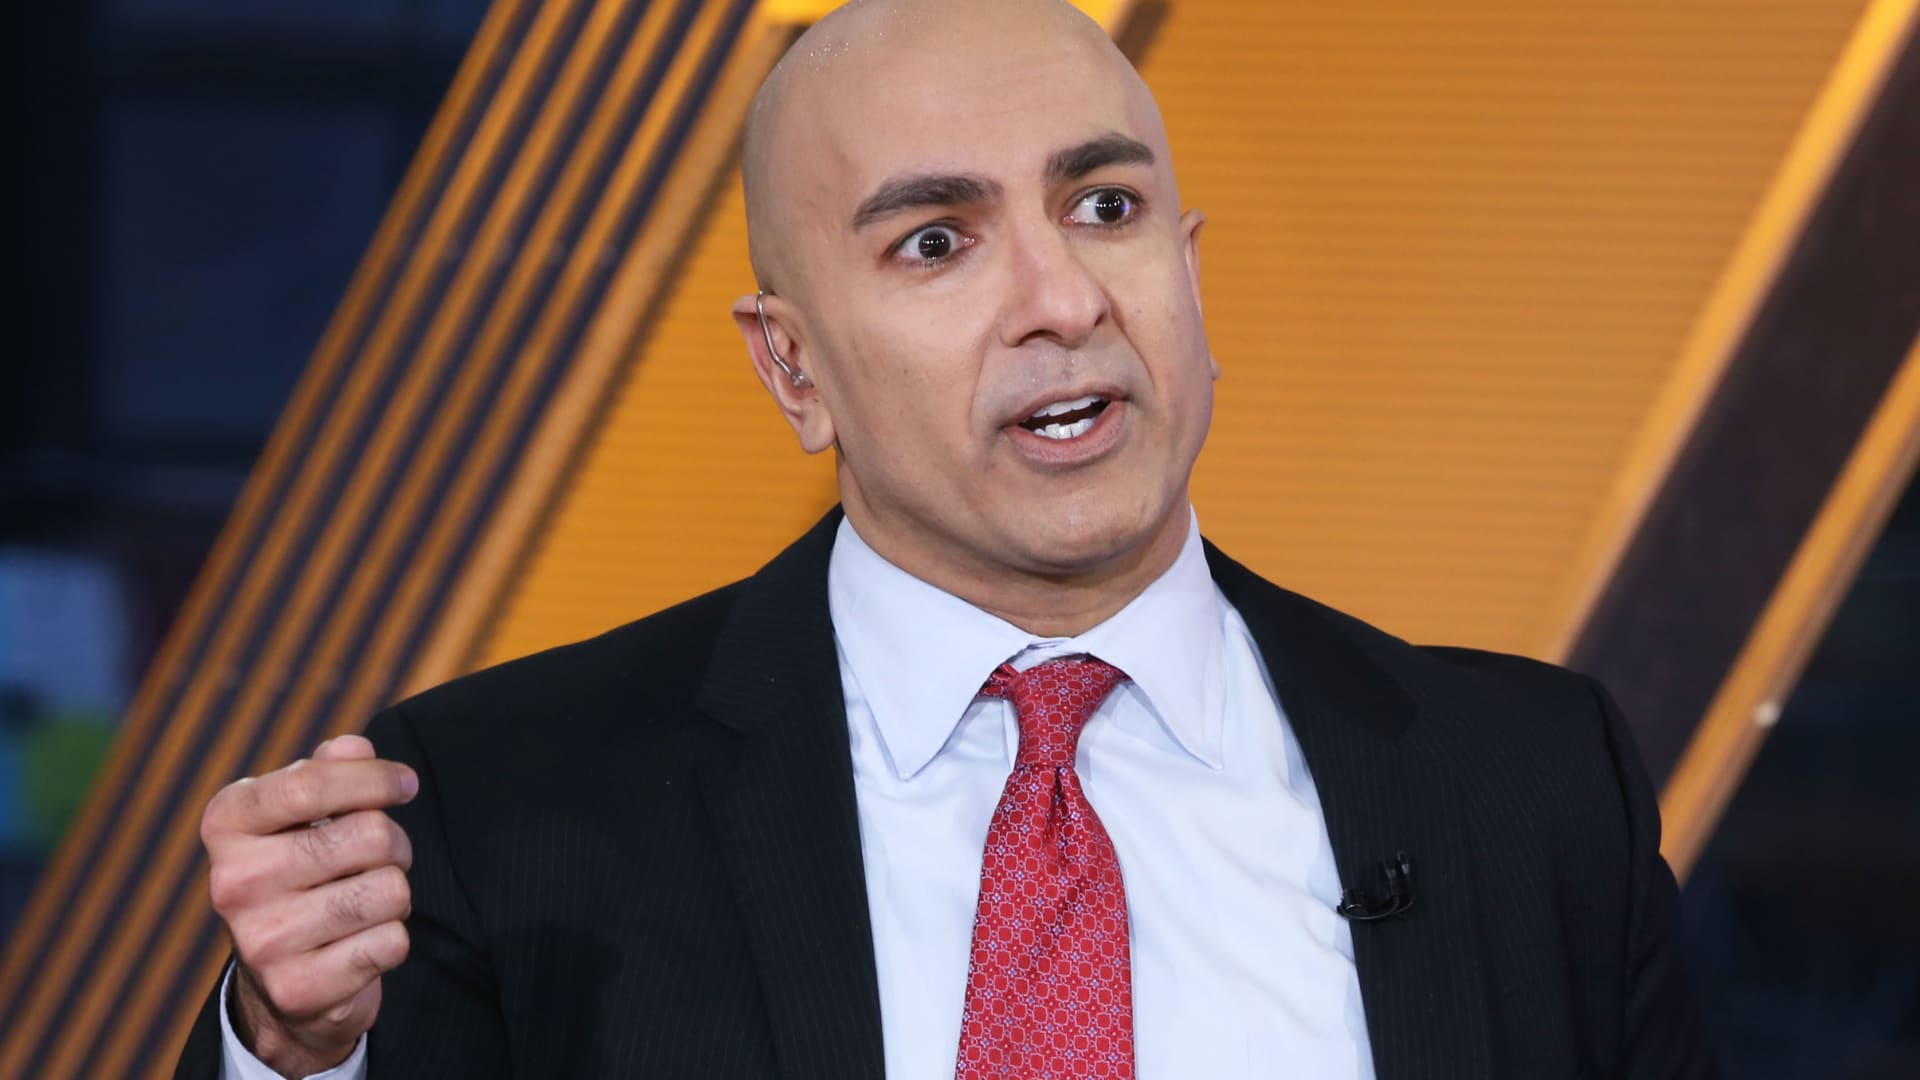 Fed’s Neel Kashkari says central bank has not made enough progress, keeping his rate outlook